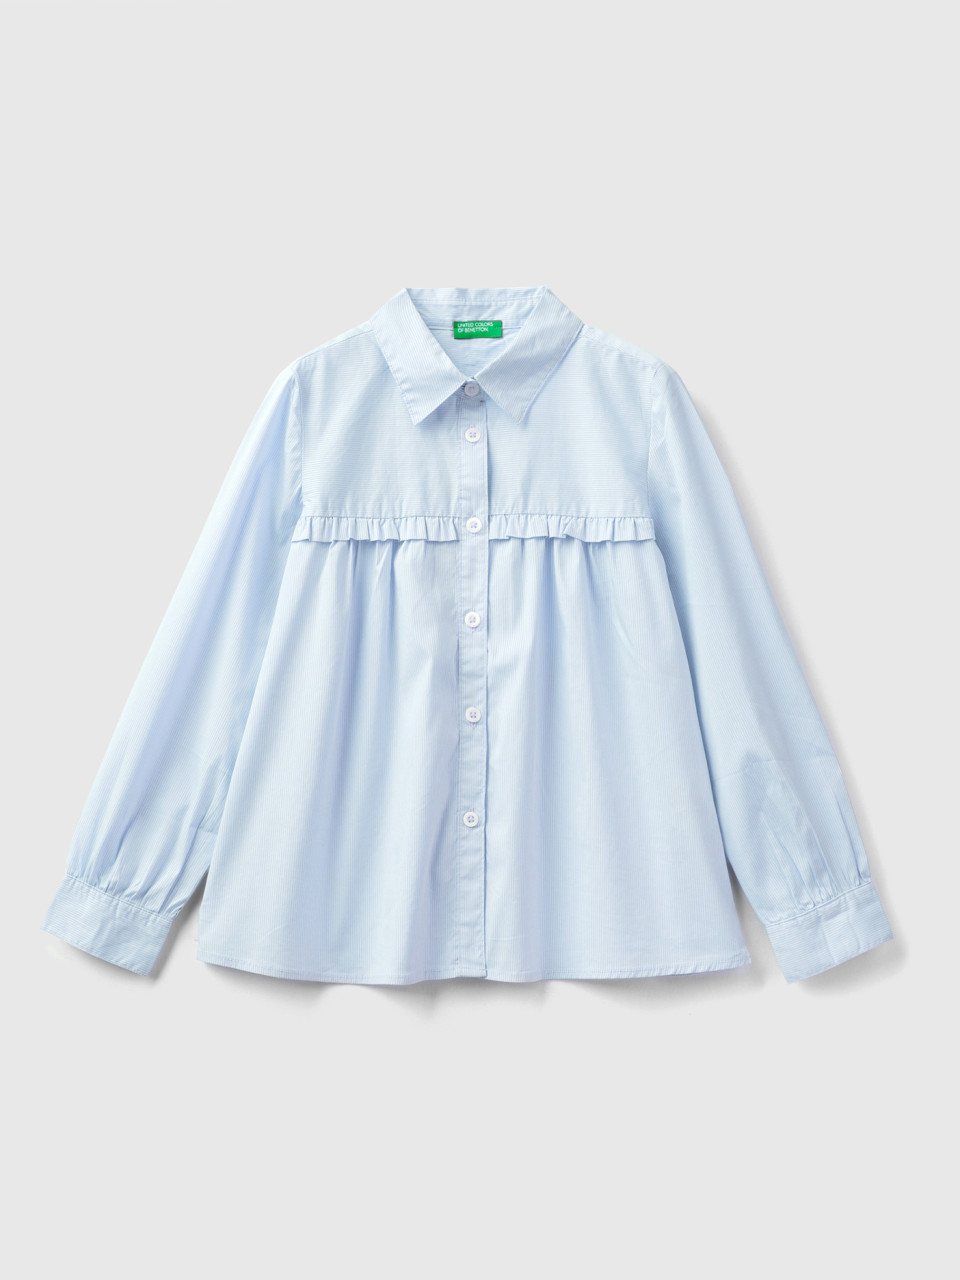 Benetton, Shirt With Rouches On The Yoke, Sky Blue, Kids